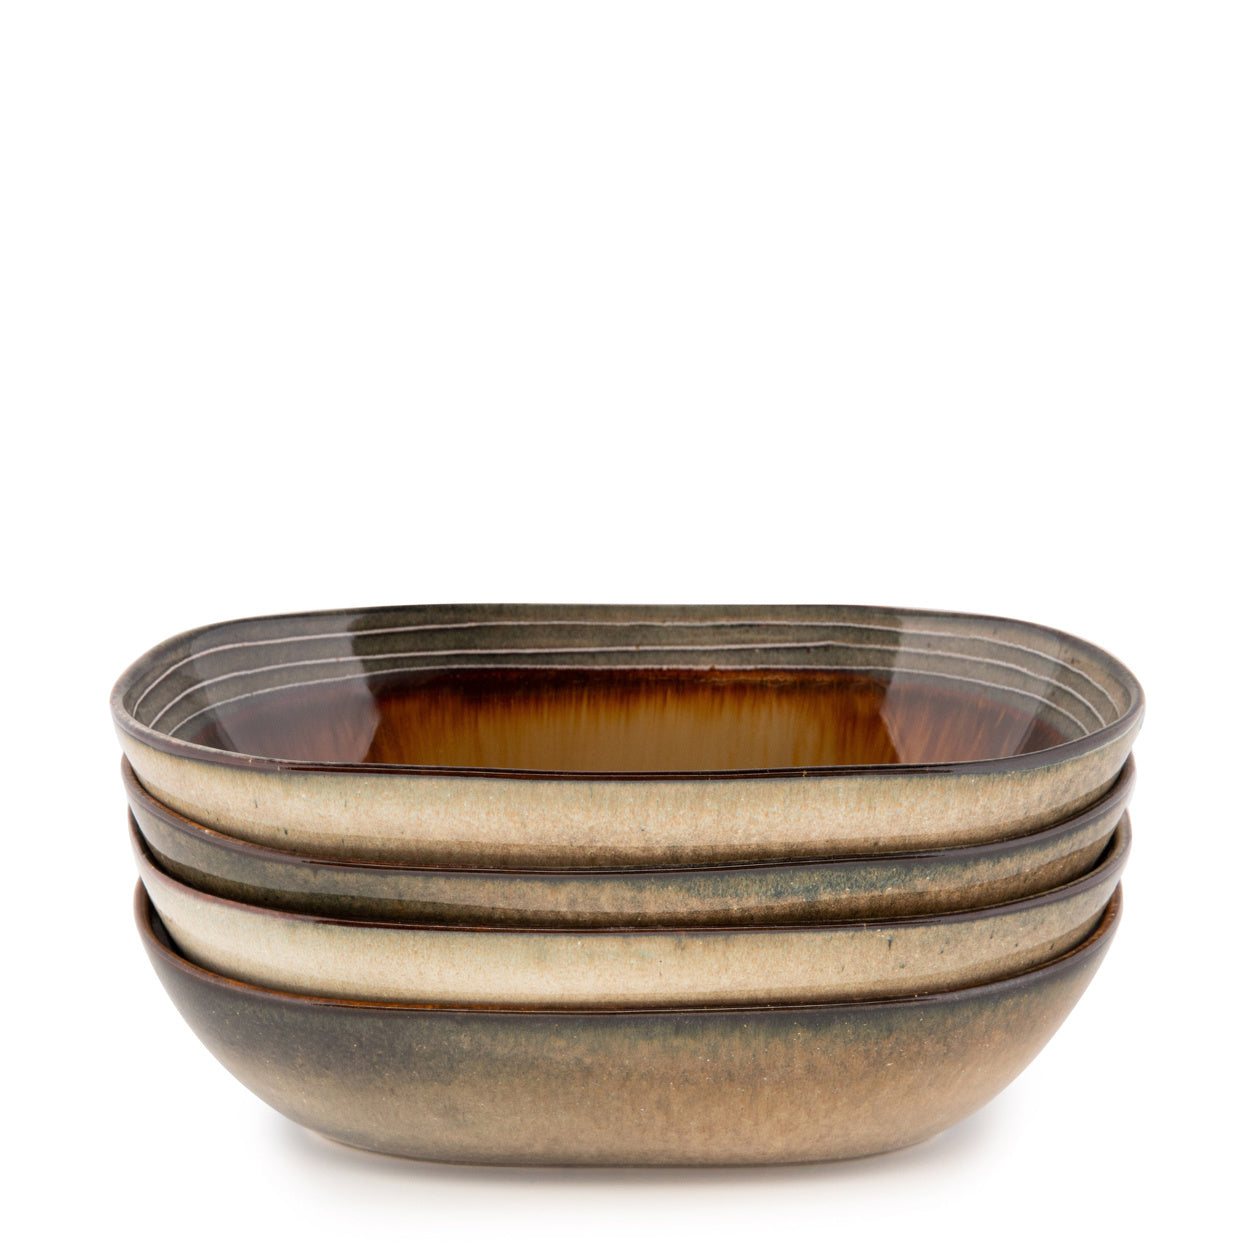 THE COMPORTA Oval Bowl Set of 4 side view folded bowls